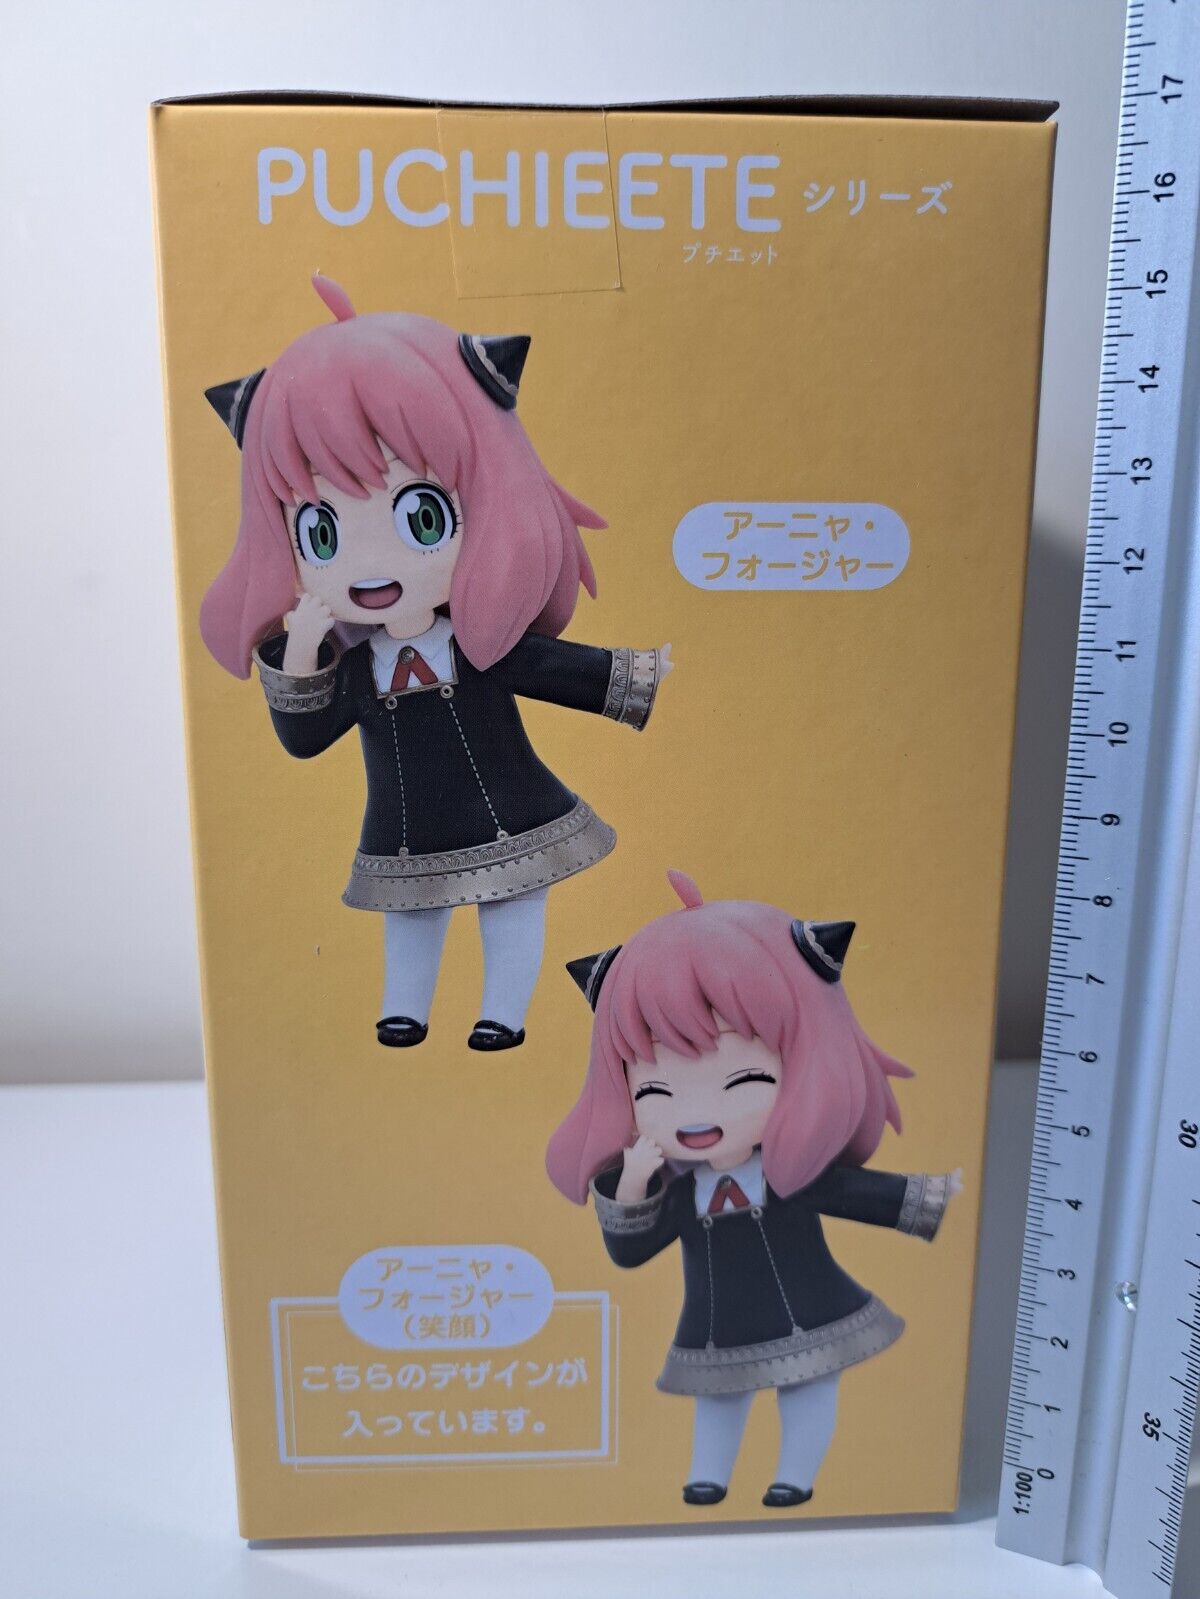 SPY x FAMILY Taito Prize Puchieete Figurine Anya Forger Vol. 2